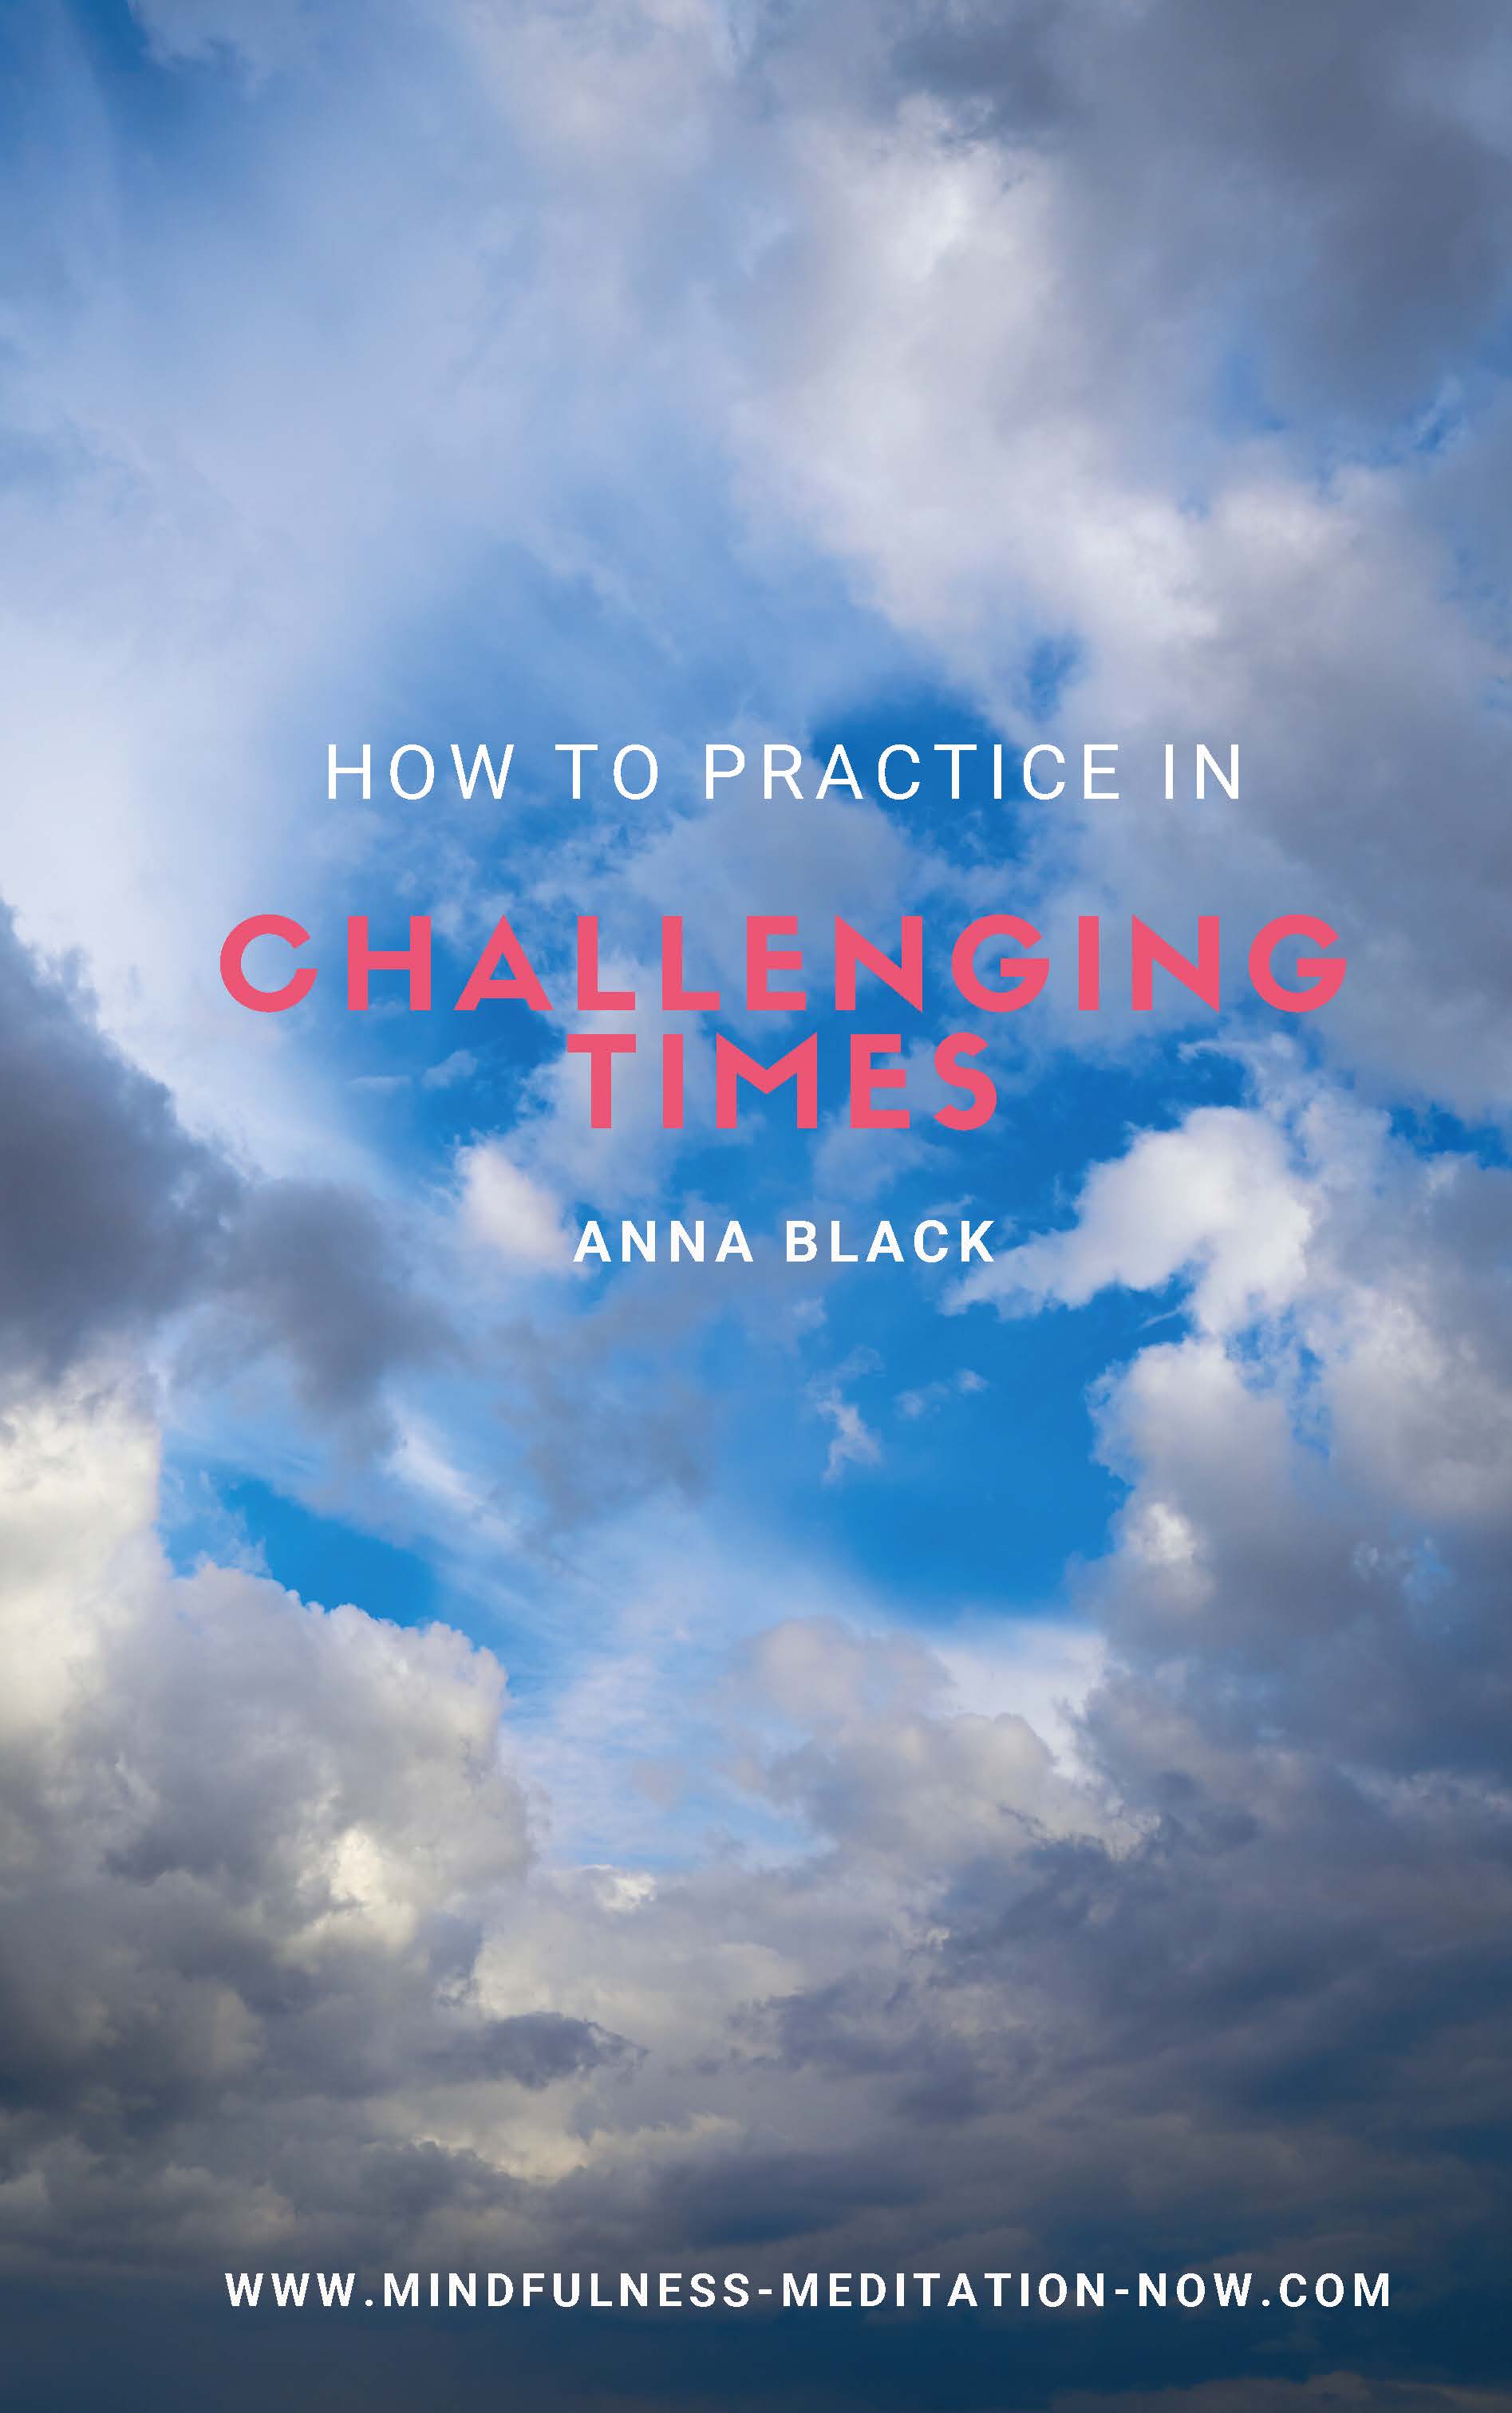 21 Ways to Integrate Mindfulness into Your Day by Anna Black